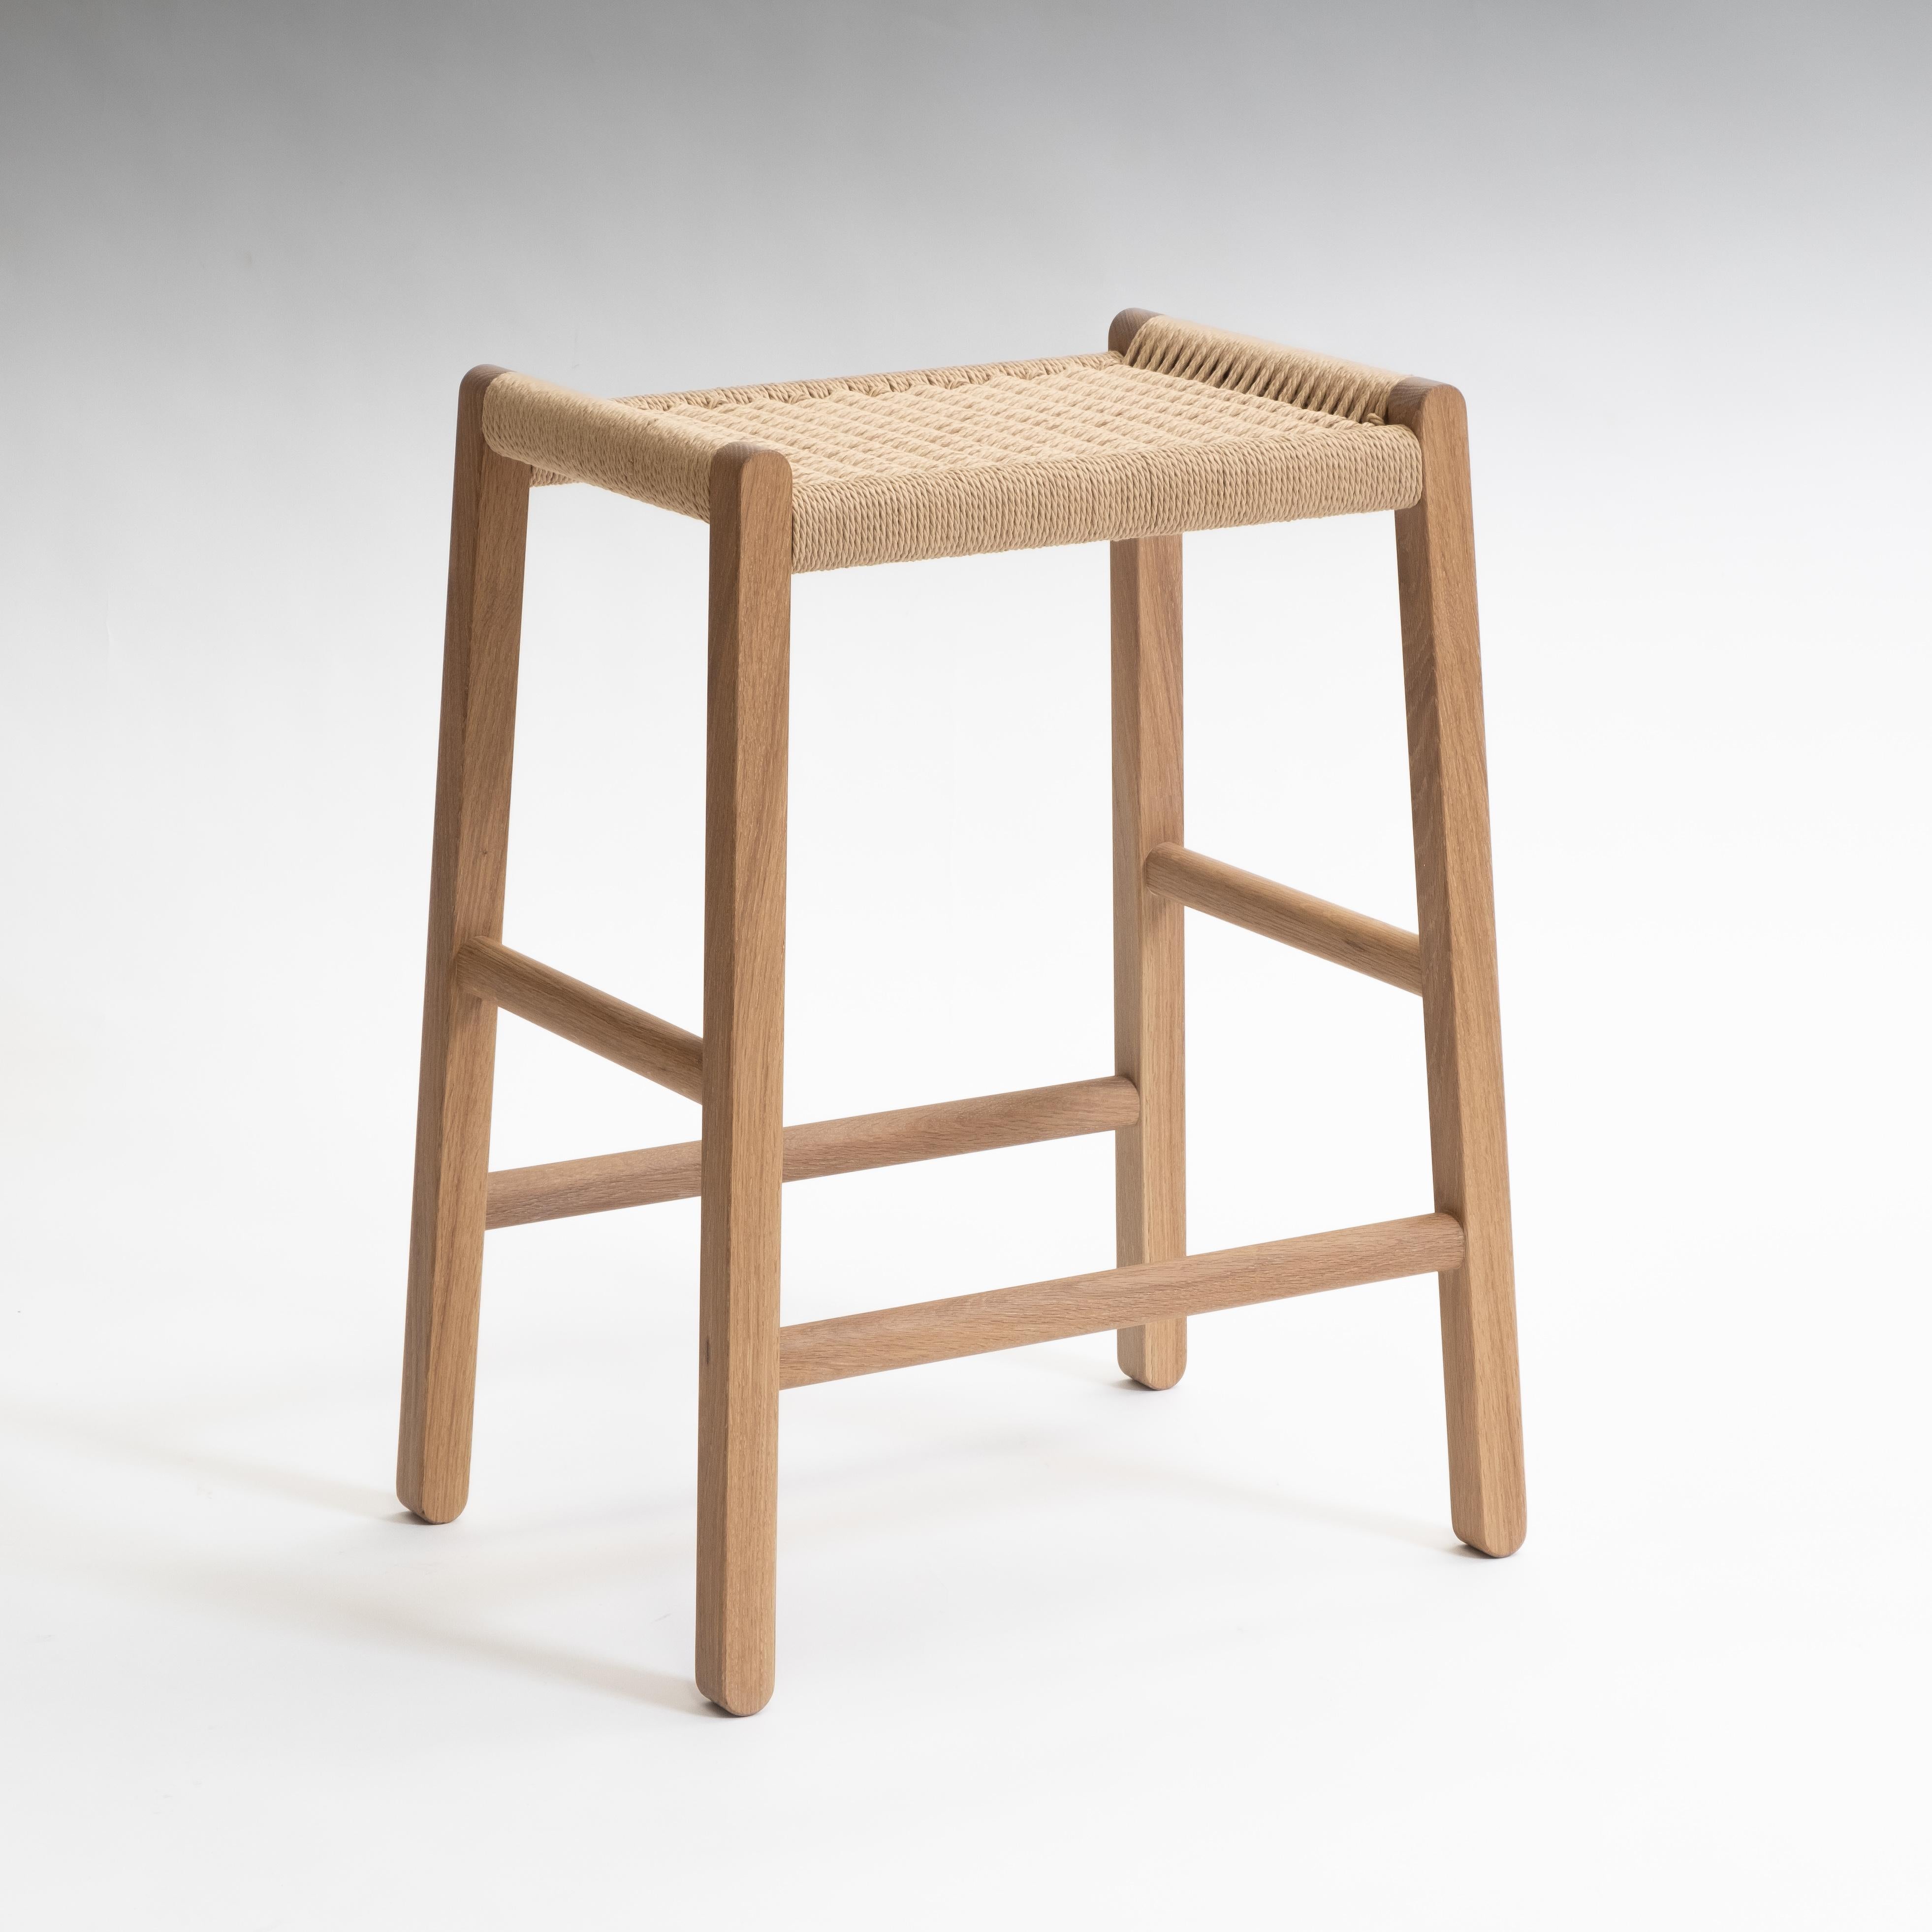 The Saddle stool is a refined Mid-Century Modern-inspired counter-height stool with a wide range of material and finish options. The clean-lined oak frame features rounded contours and durable mortise and tenon joints. The resilient seat is